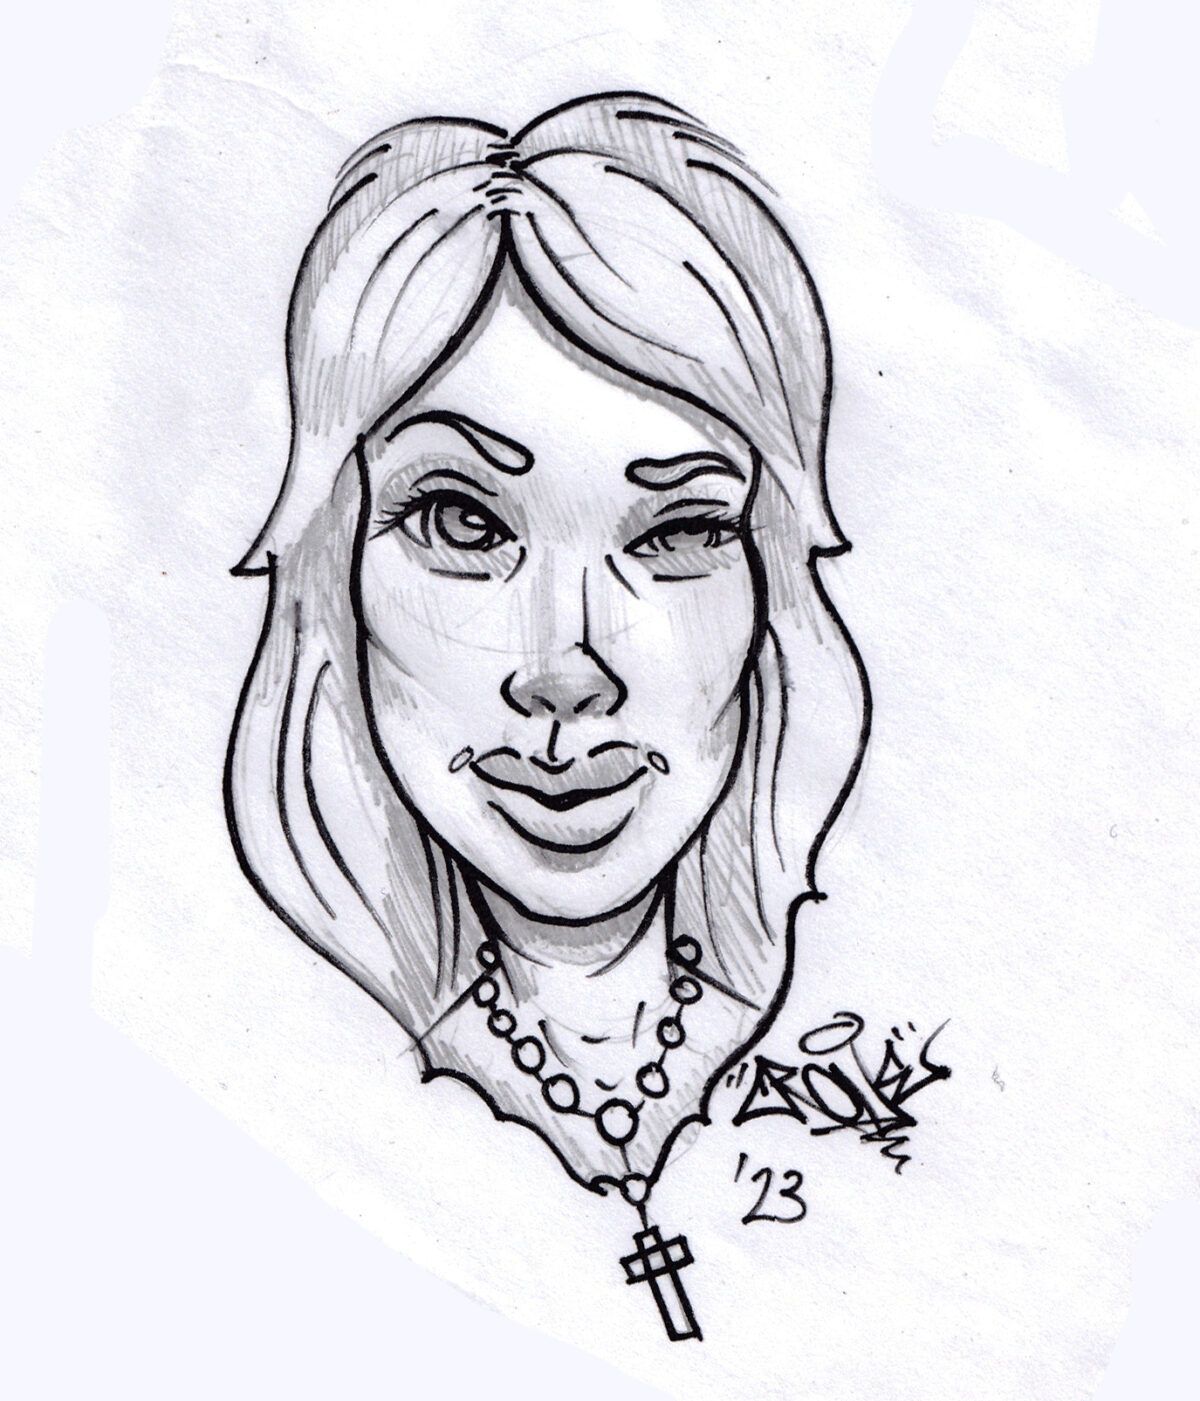 Caricature, doodle, art, sketches, ink